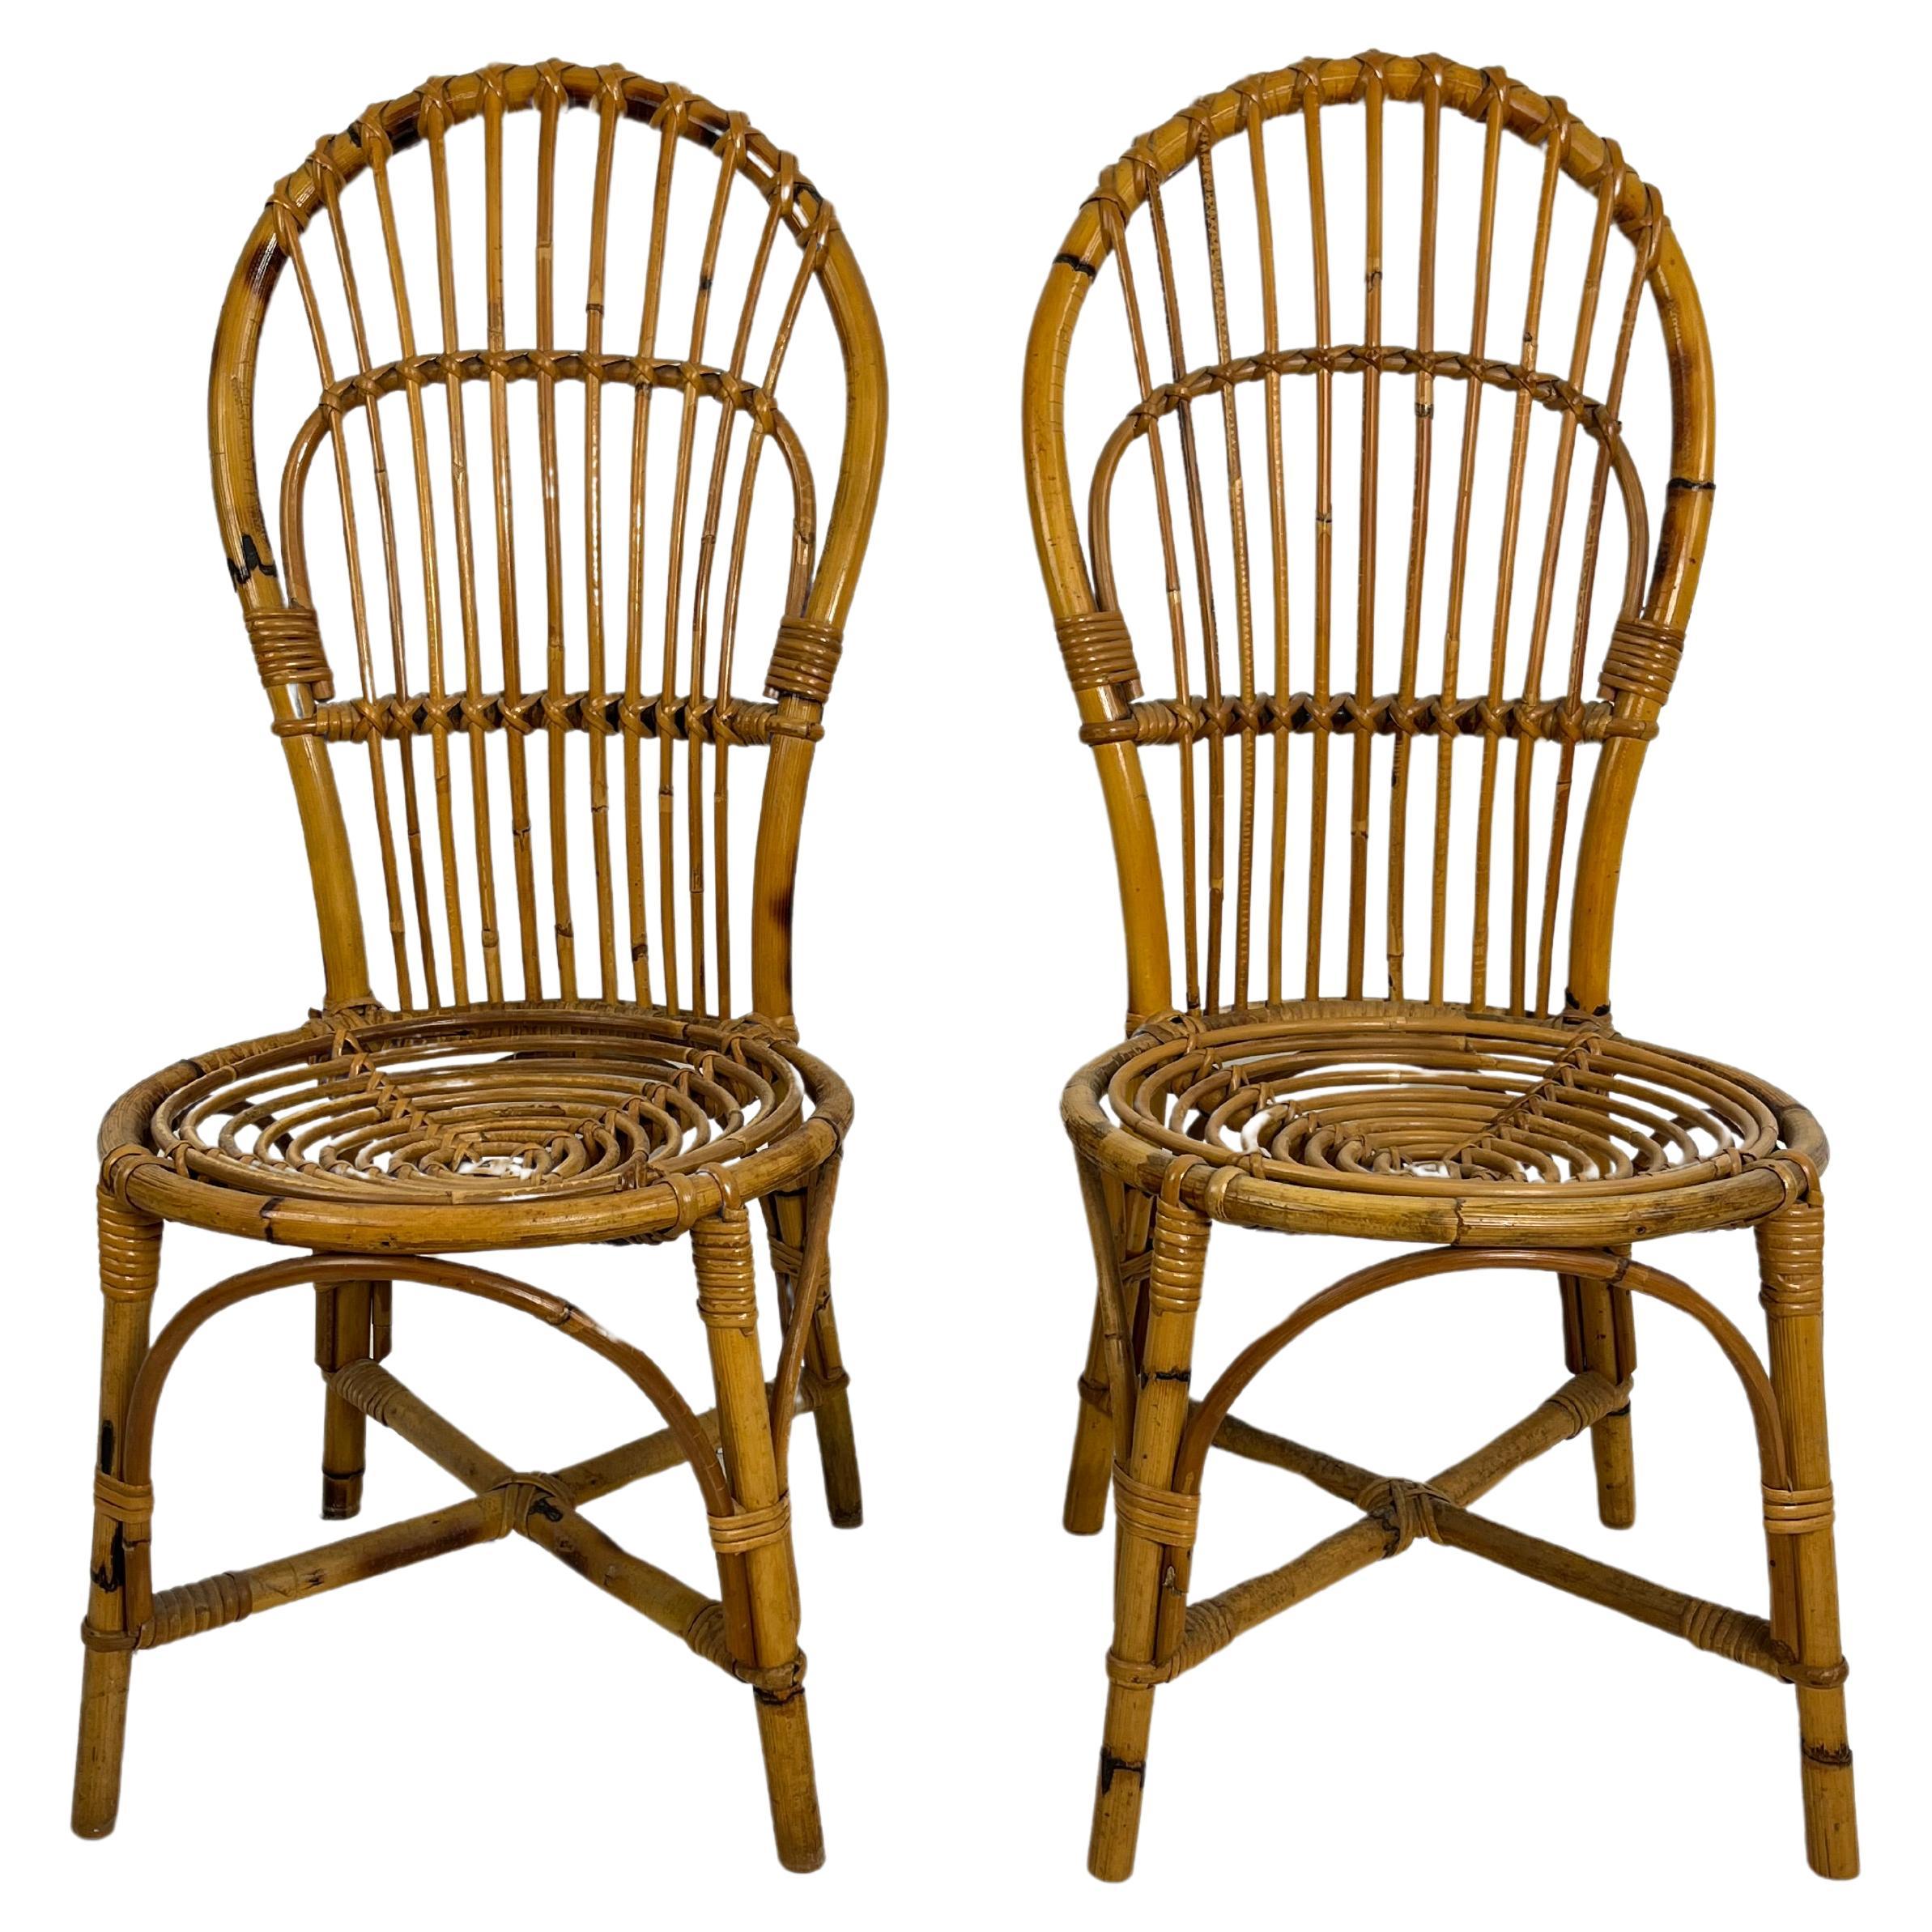 Set of 2 Small Mid-Century Bamboo Chairs, Italian Design 1950s For Sale